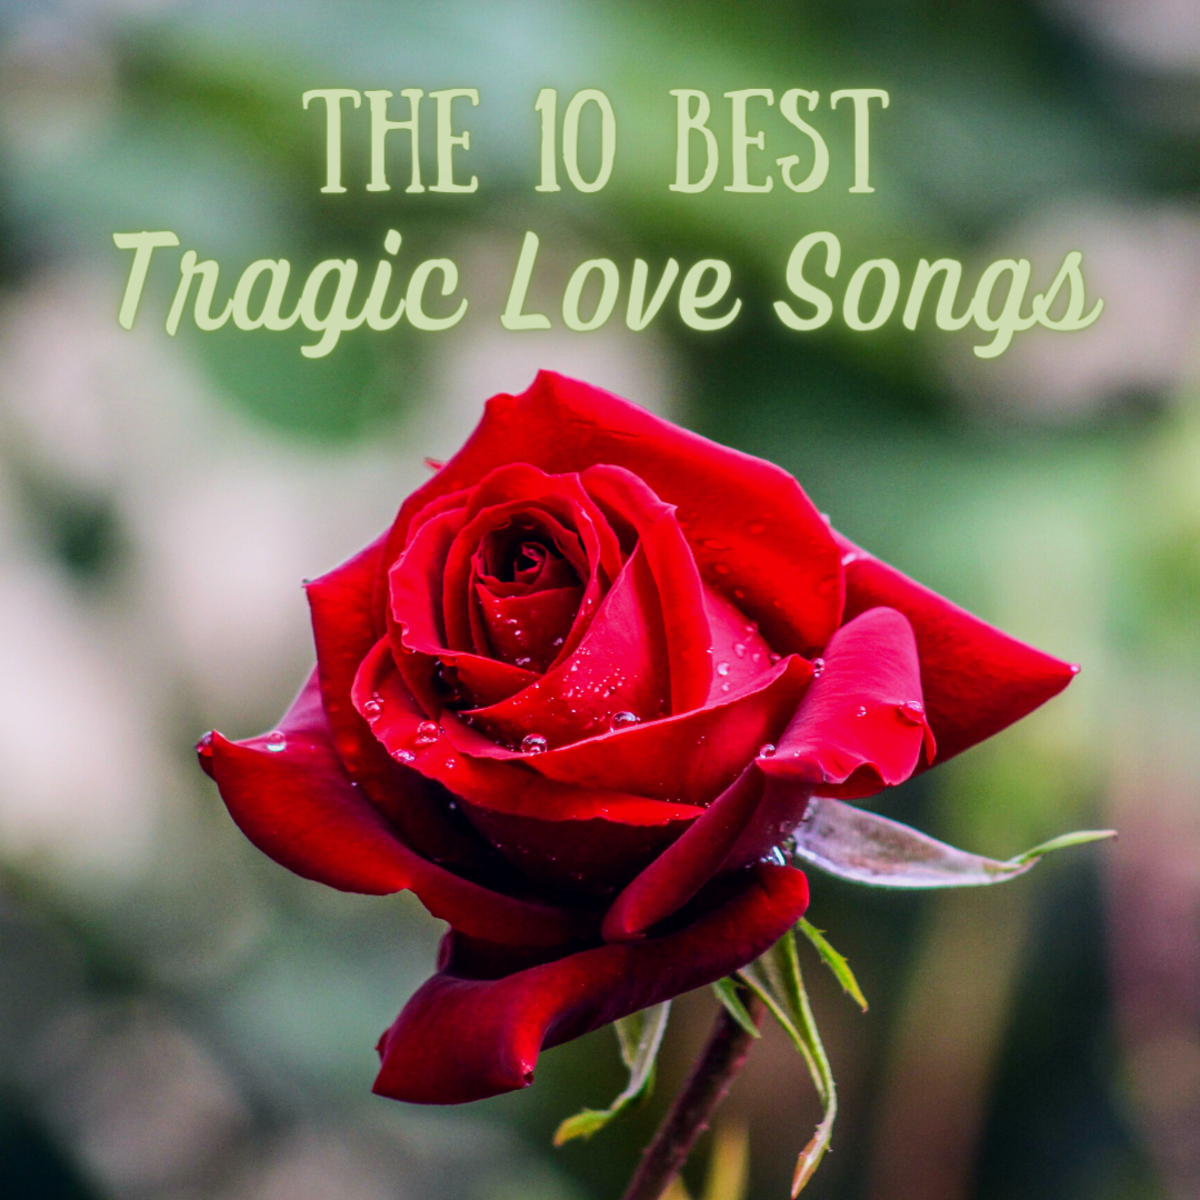 Tragic love songs are touching and poignant—here are the top 10.